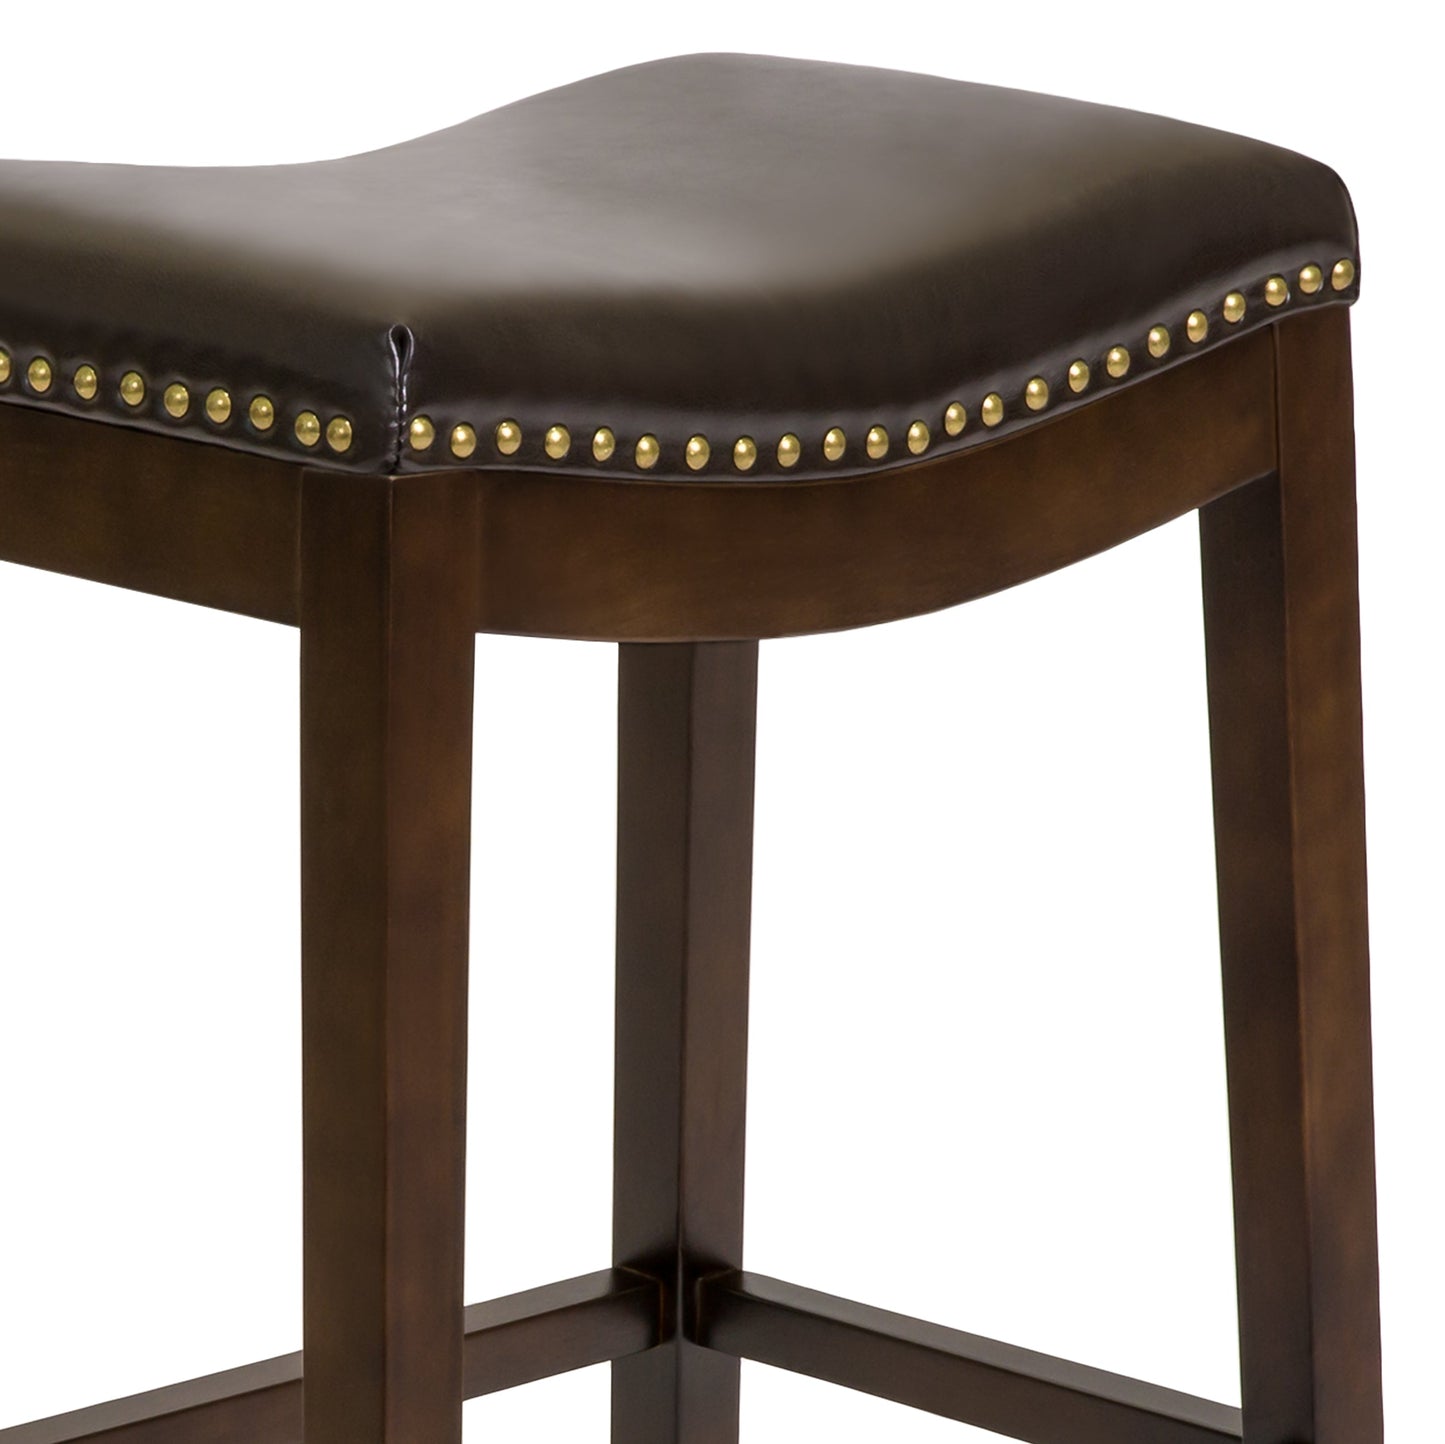 Set of 2 31in Backless Bar Stool Accent Chairs w/ Faux Leather, Brass Studs